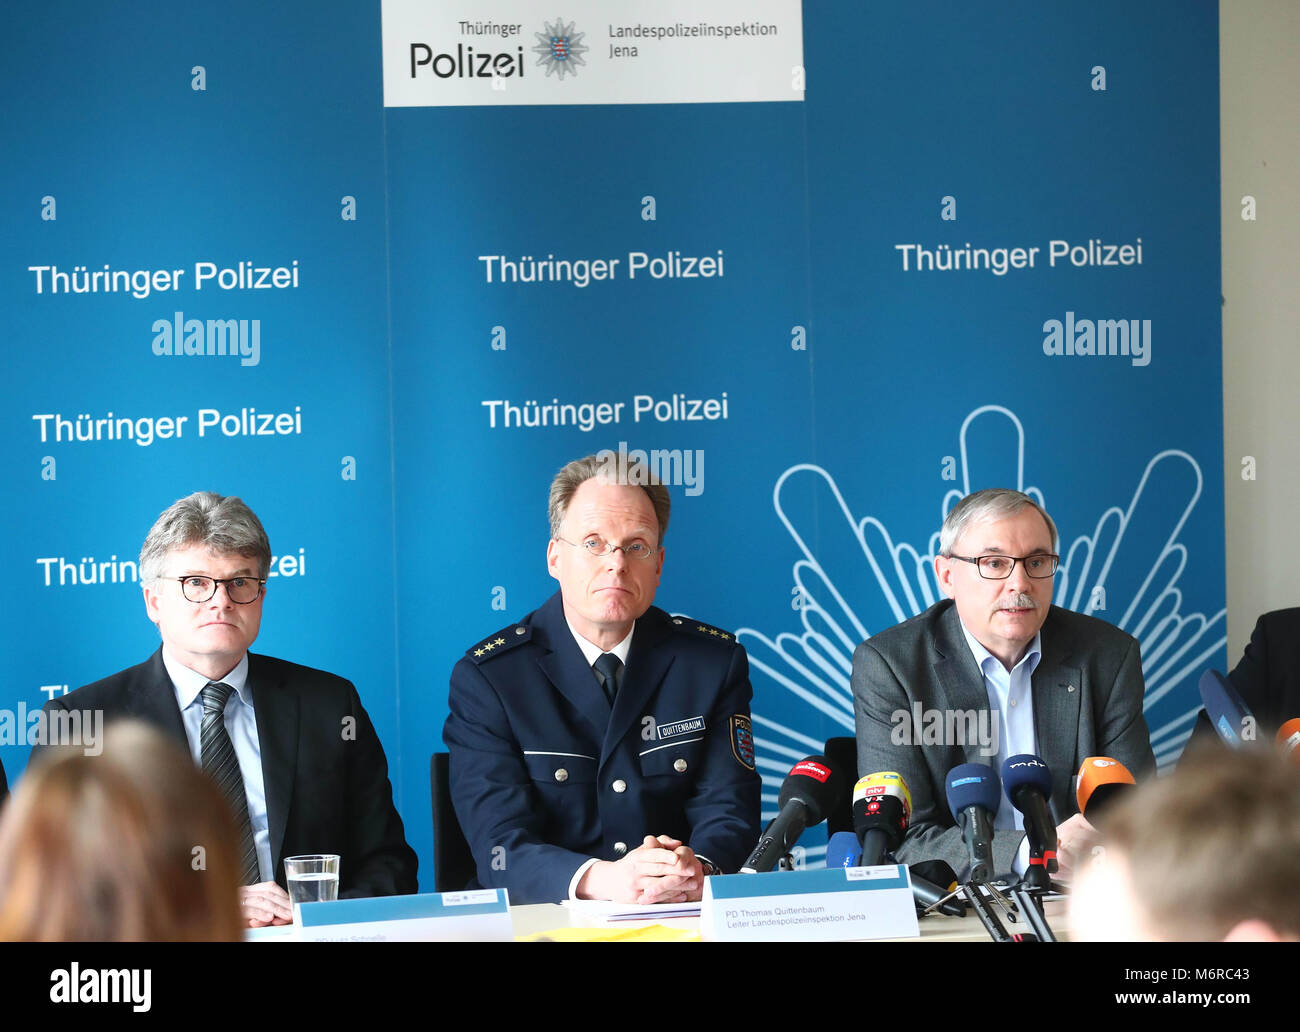 06 March 2018, Germany, Jena: Operation directors of the 'Cold cases' special commission, police director Lutz Schnelle (left to right), police director Thomas Quittenbaum, director of the Jena Police and Senior State Prosecutor Thomas Villwock speaking to the media during a press conference by the Jena Police. The reason for the press conference is the resolution of the 1991 case of Stephanie Drew's murder. A man suspected of the crime was arrested as part of the investigation. The case is the oldest of three cases of child murder in Jena and Weimar under investigation by the special commissi Stock Photo